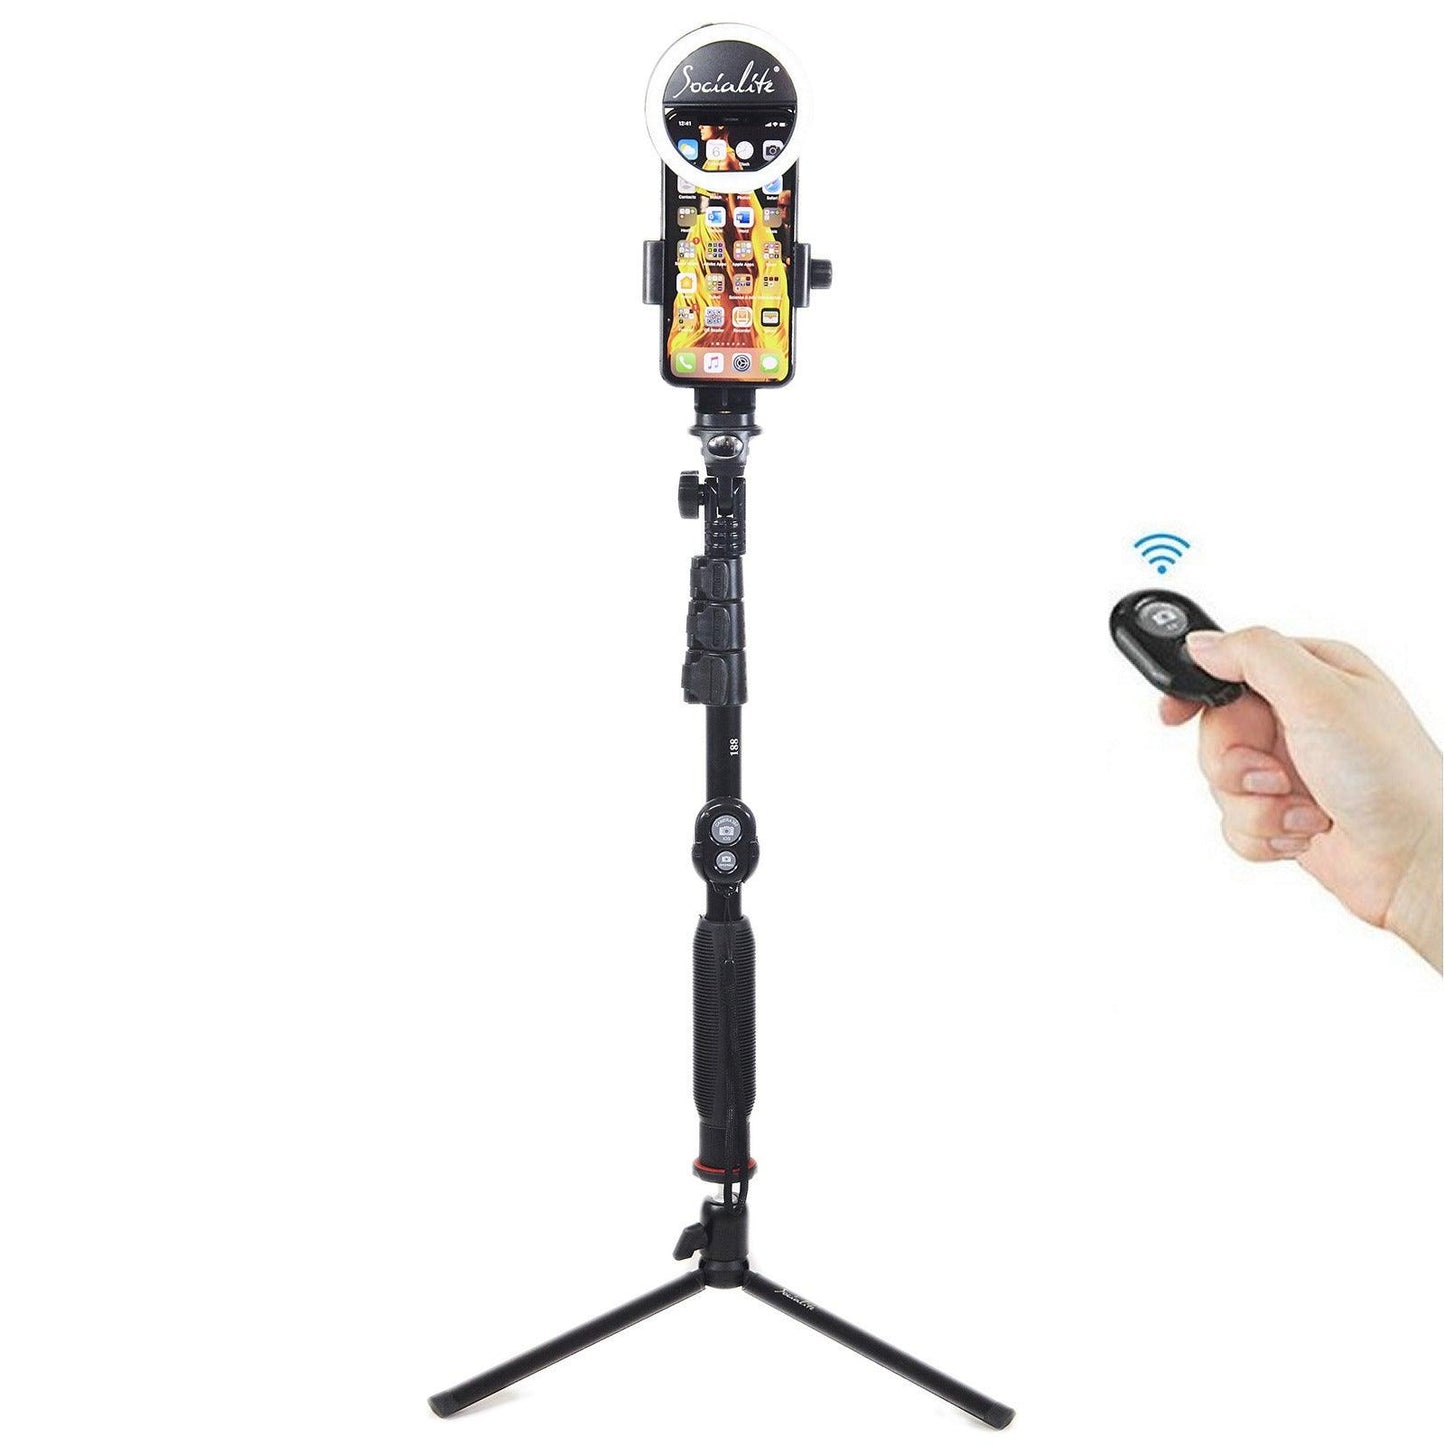 SOCIALITE Selfie Stick Ring Light Kit with remote